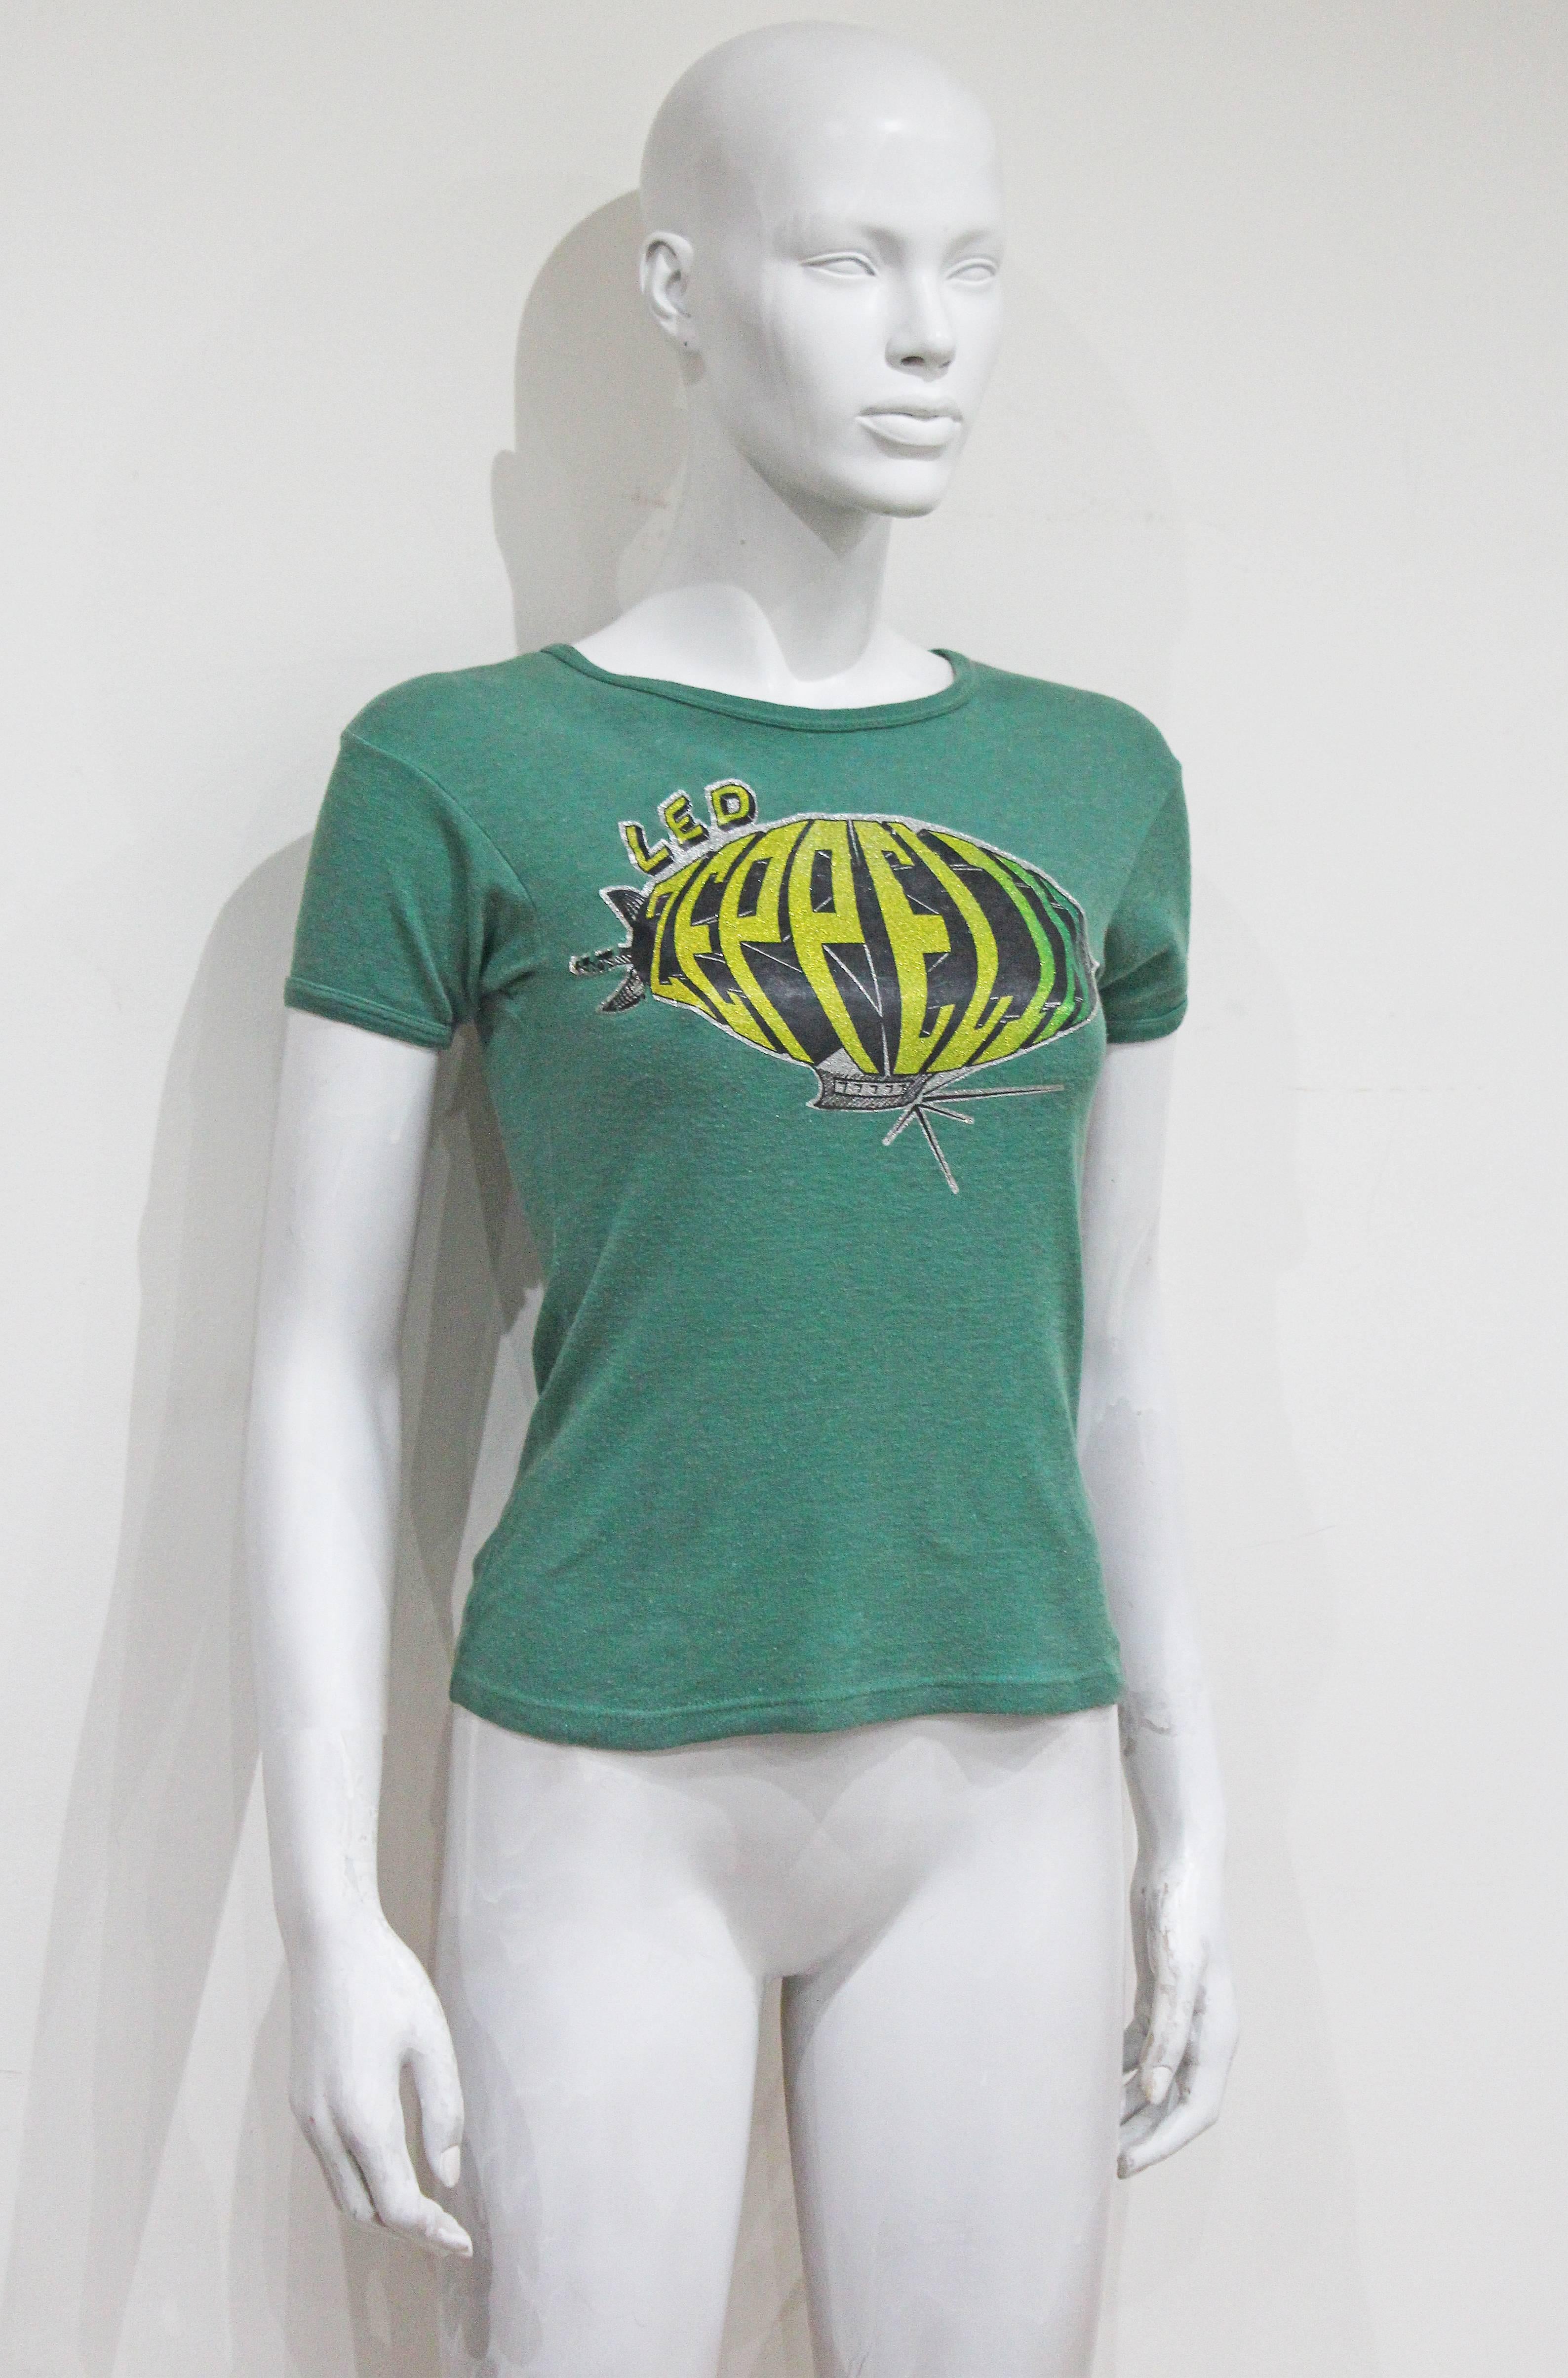 A very rare Led Zeppelin band tee from the 1970s. The t-shirt is in green cotton and has a sparkly glazed texture to the logo. 

SMALL